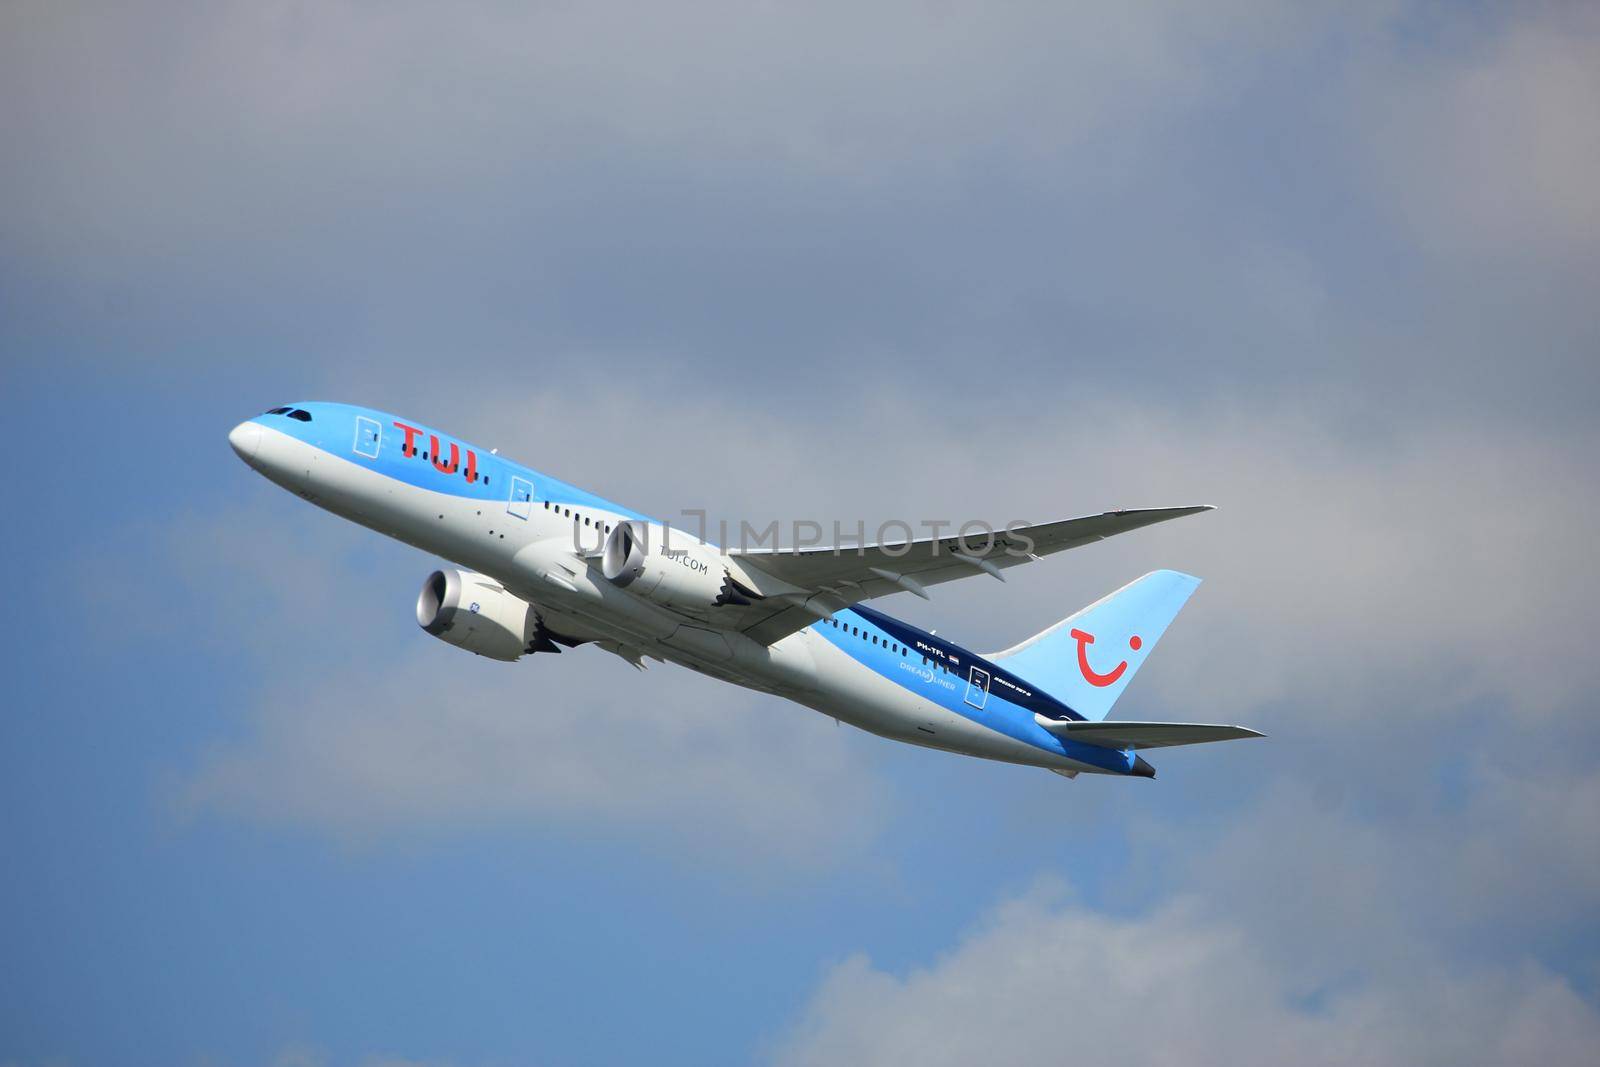 Amsterdam the Netherlands - September 23rd 2017: PH-TFL TUI Airlines Netherlands Boeing 787-8 Dreamliner  takeoff from Kaagbaan runway, Amsterdam Airport Schiphol